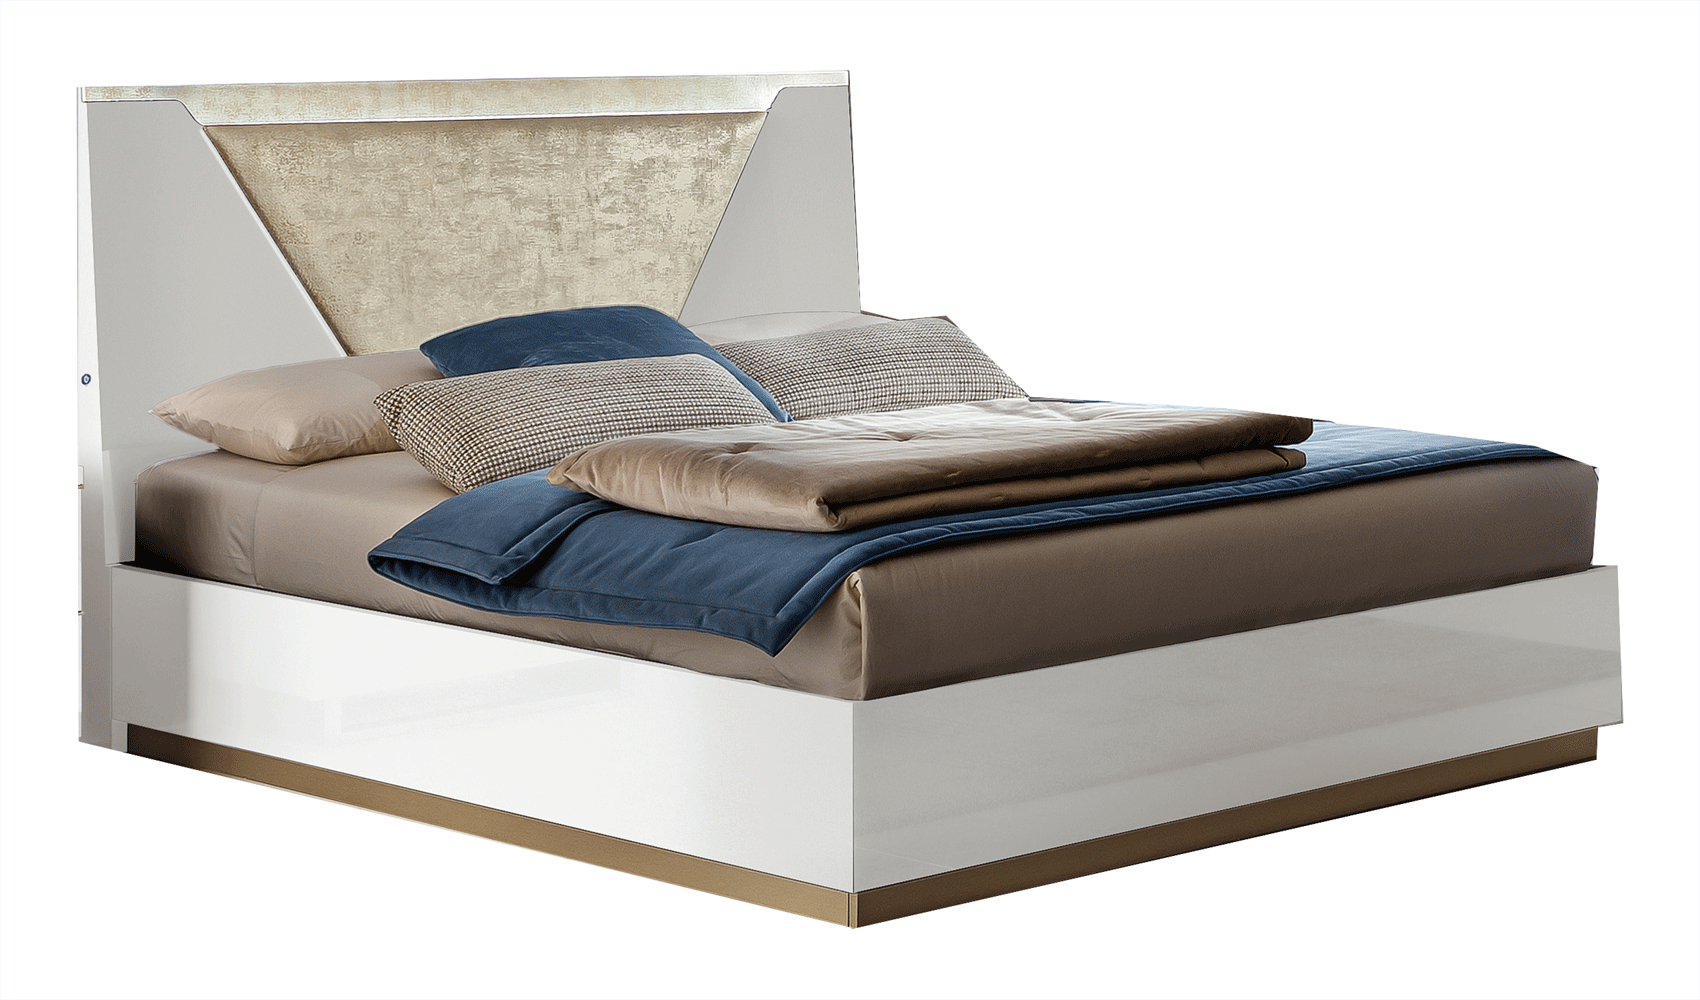 Bedroom Furniture Beds with storage Smart Bed White